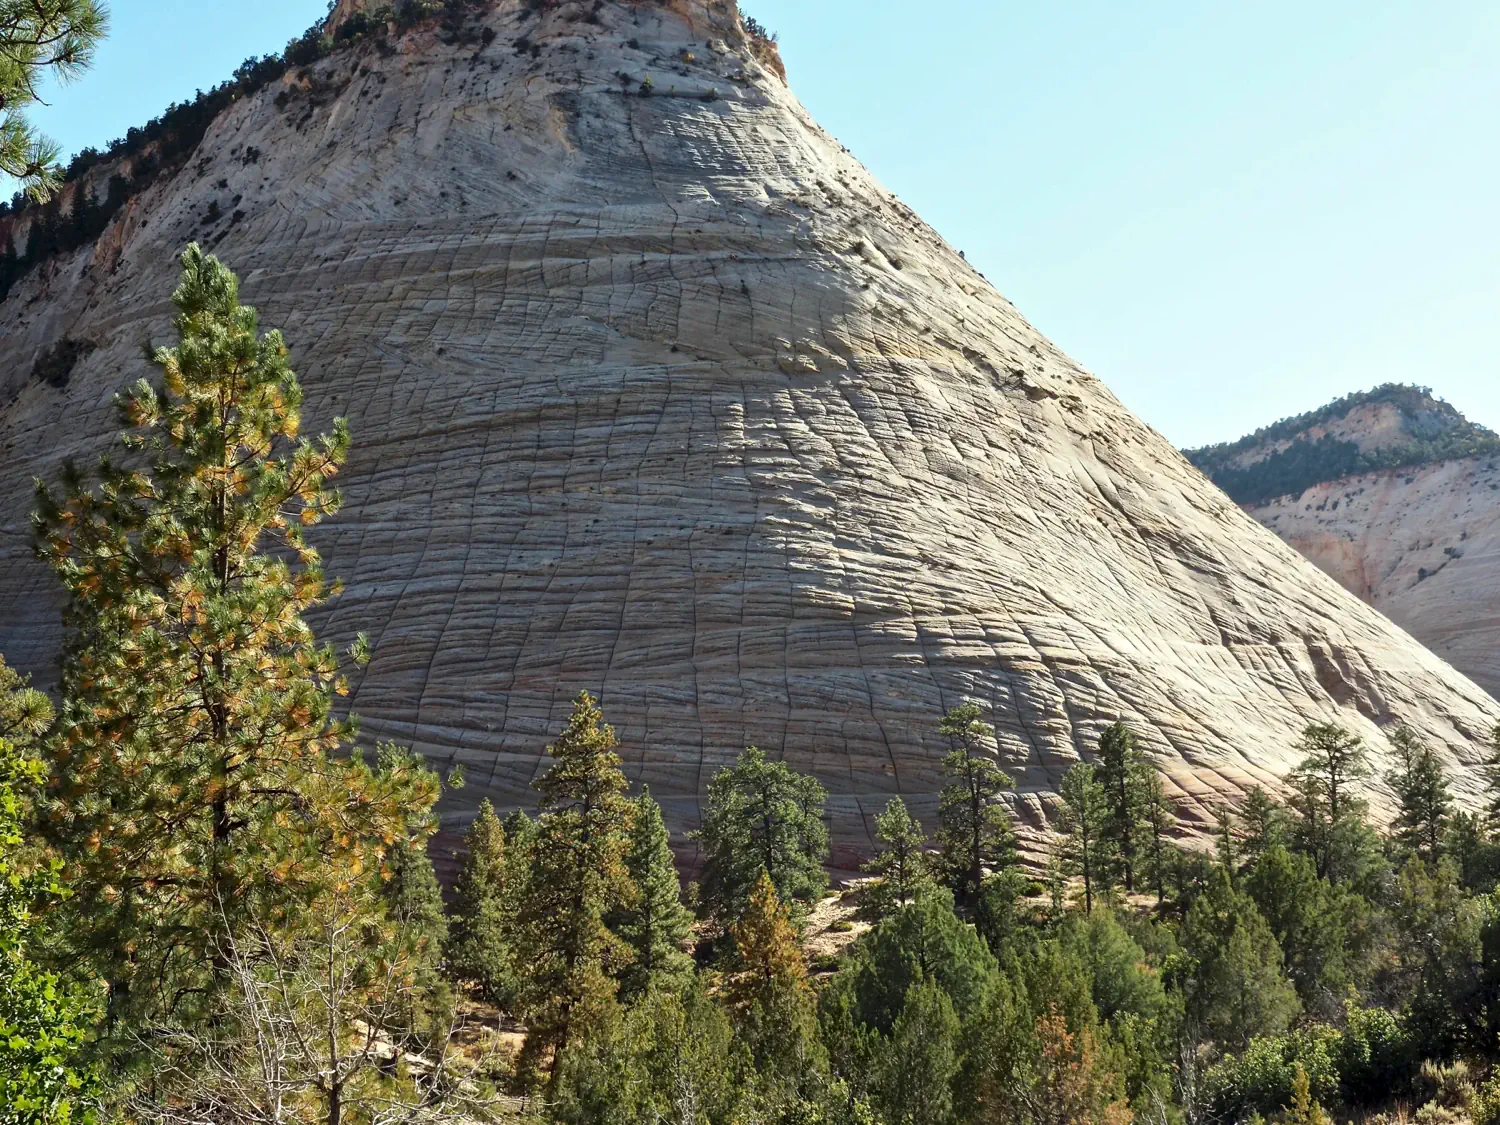 The magnificent Checkerboard Mesa can be seen from the highway